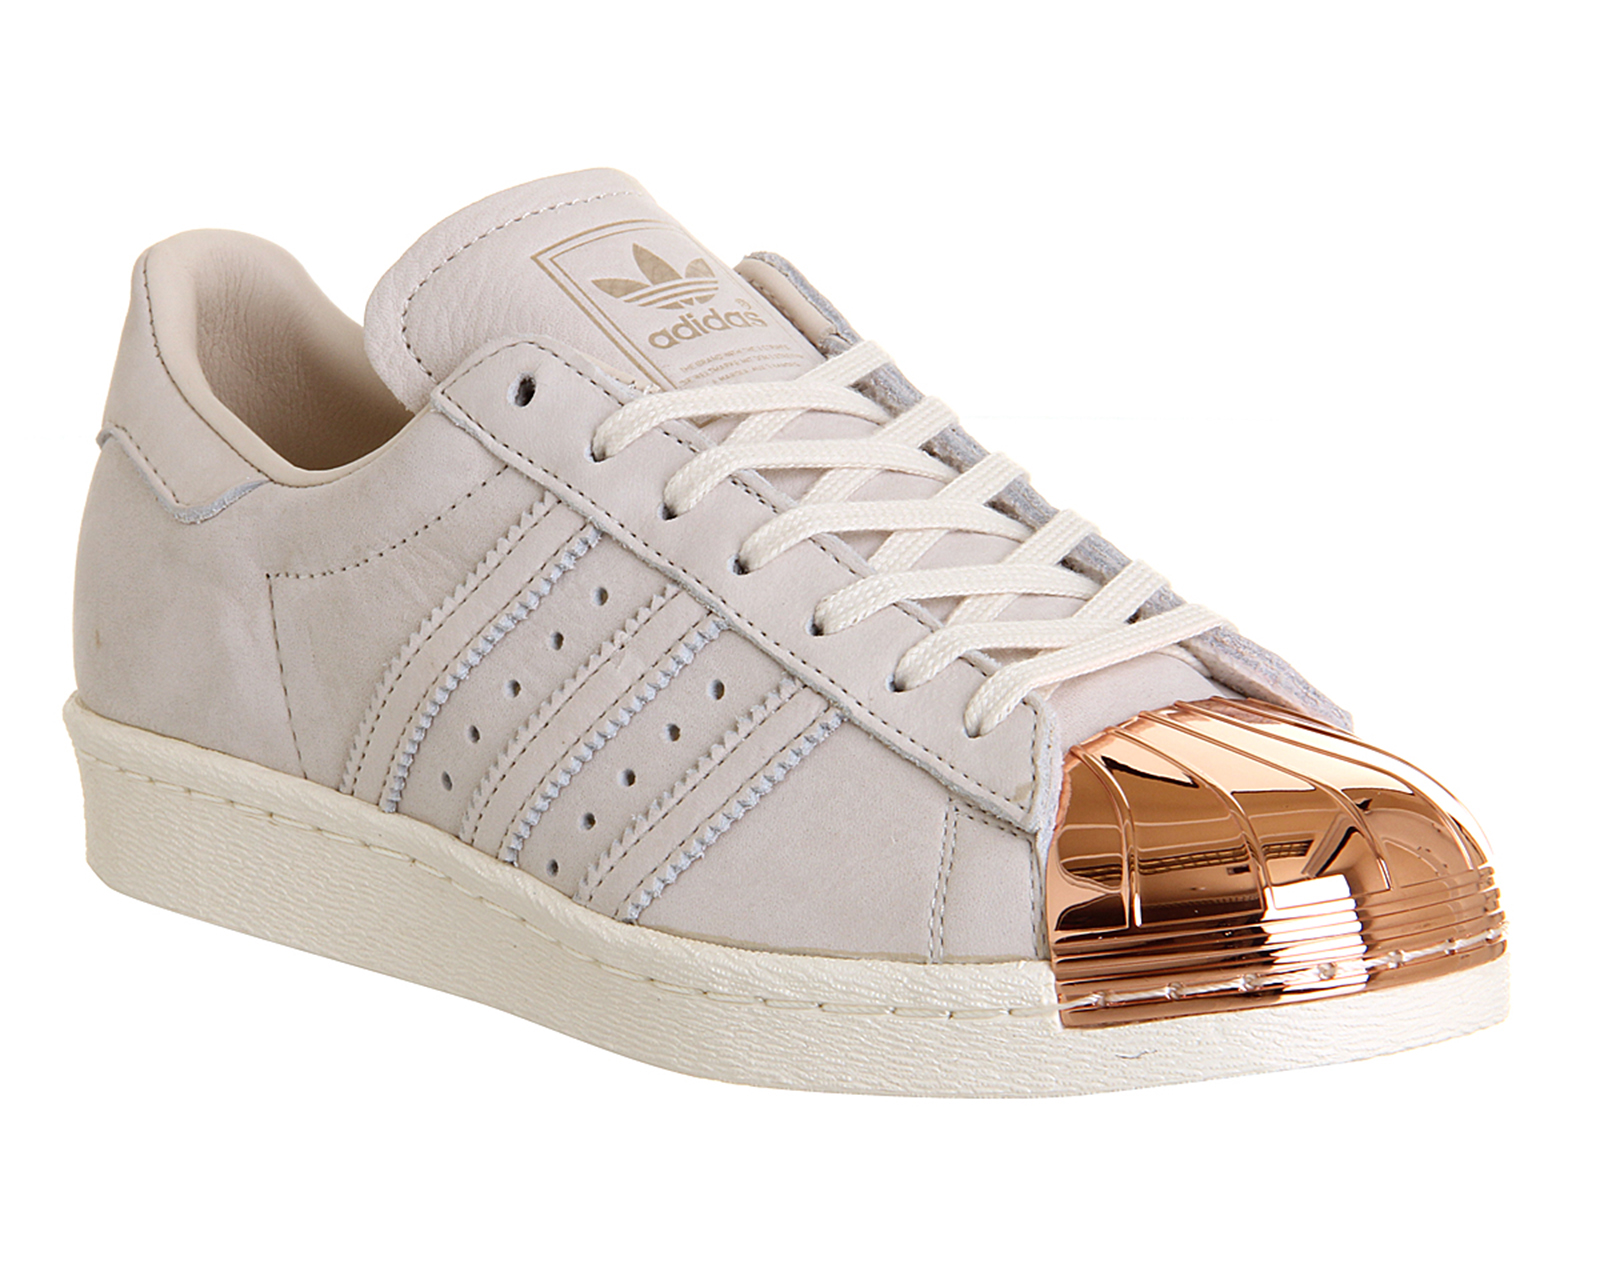 Rose Gold Adidas Shoes - www.inf-inet.com